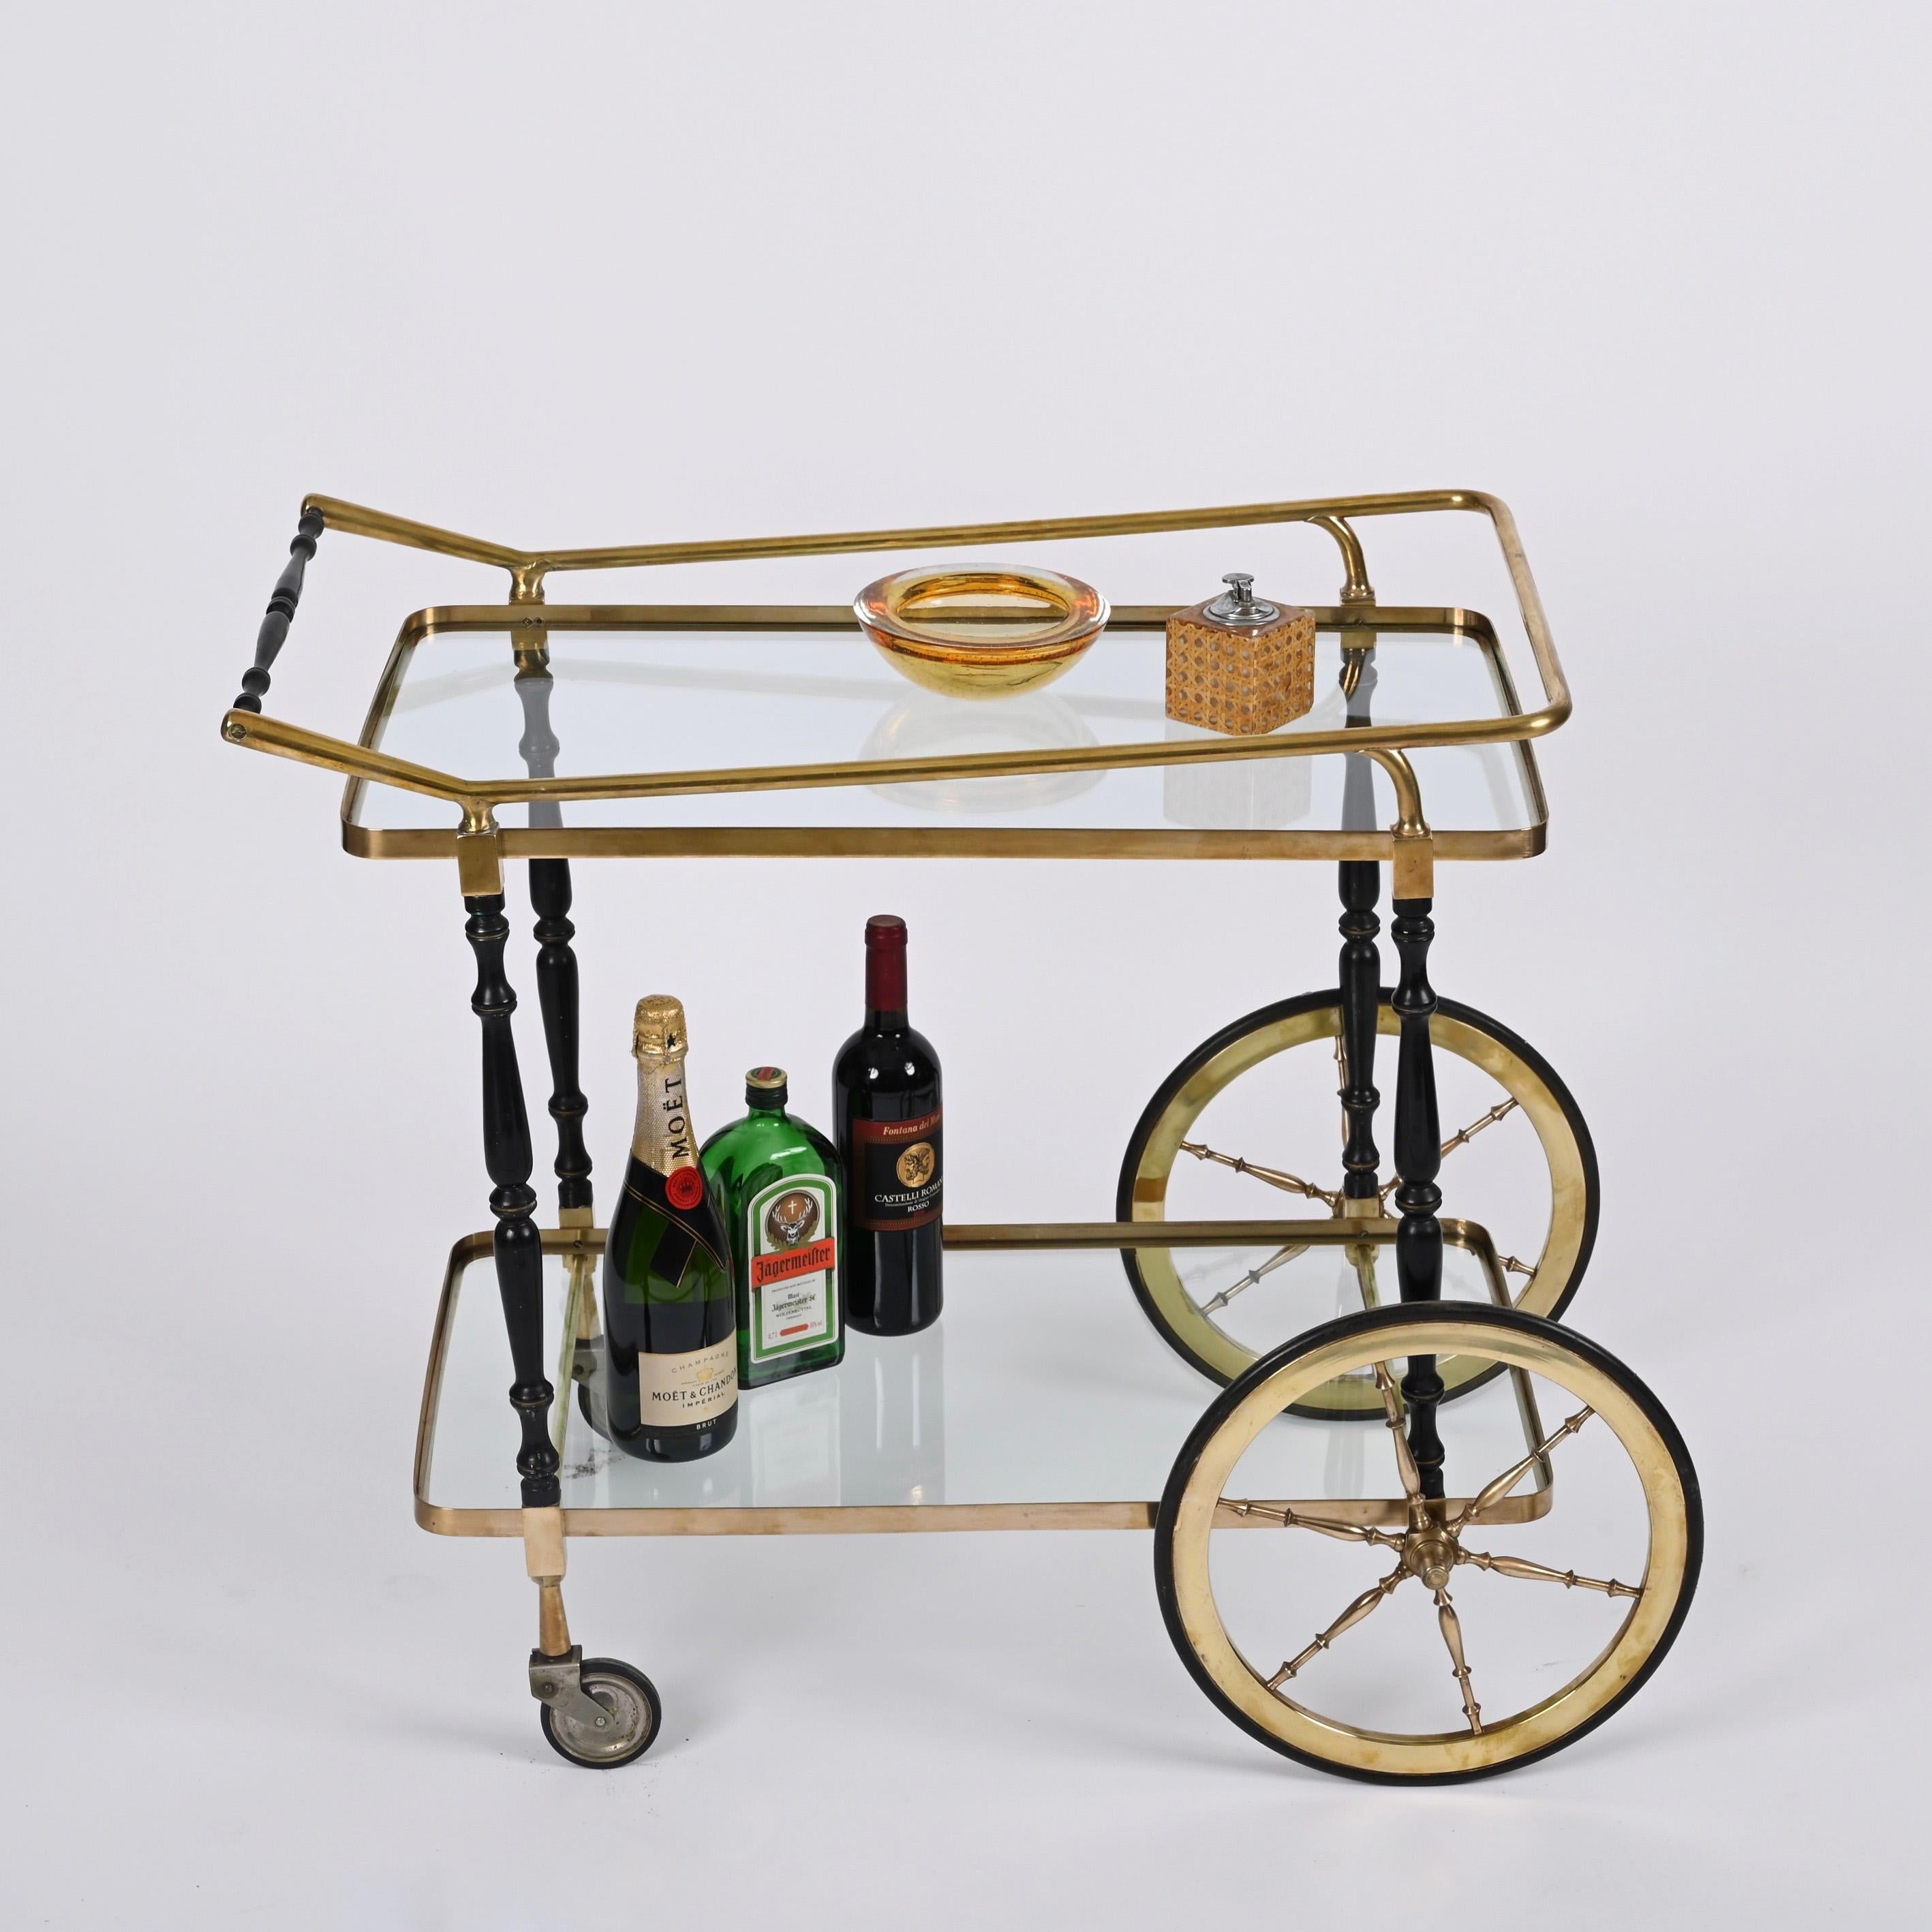 Wonderful midcentury vintage serving table or bar cart with brass frame. Cesare Lacca probably designed this extraordinary item and was produced in Italy during the 1950s.

This item is a very rare, cool and practical midcentury serving and drink